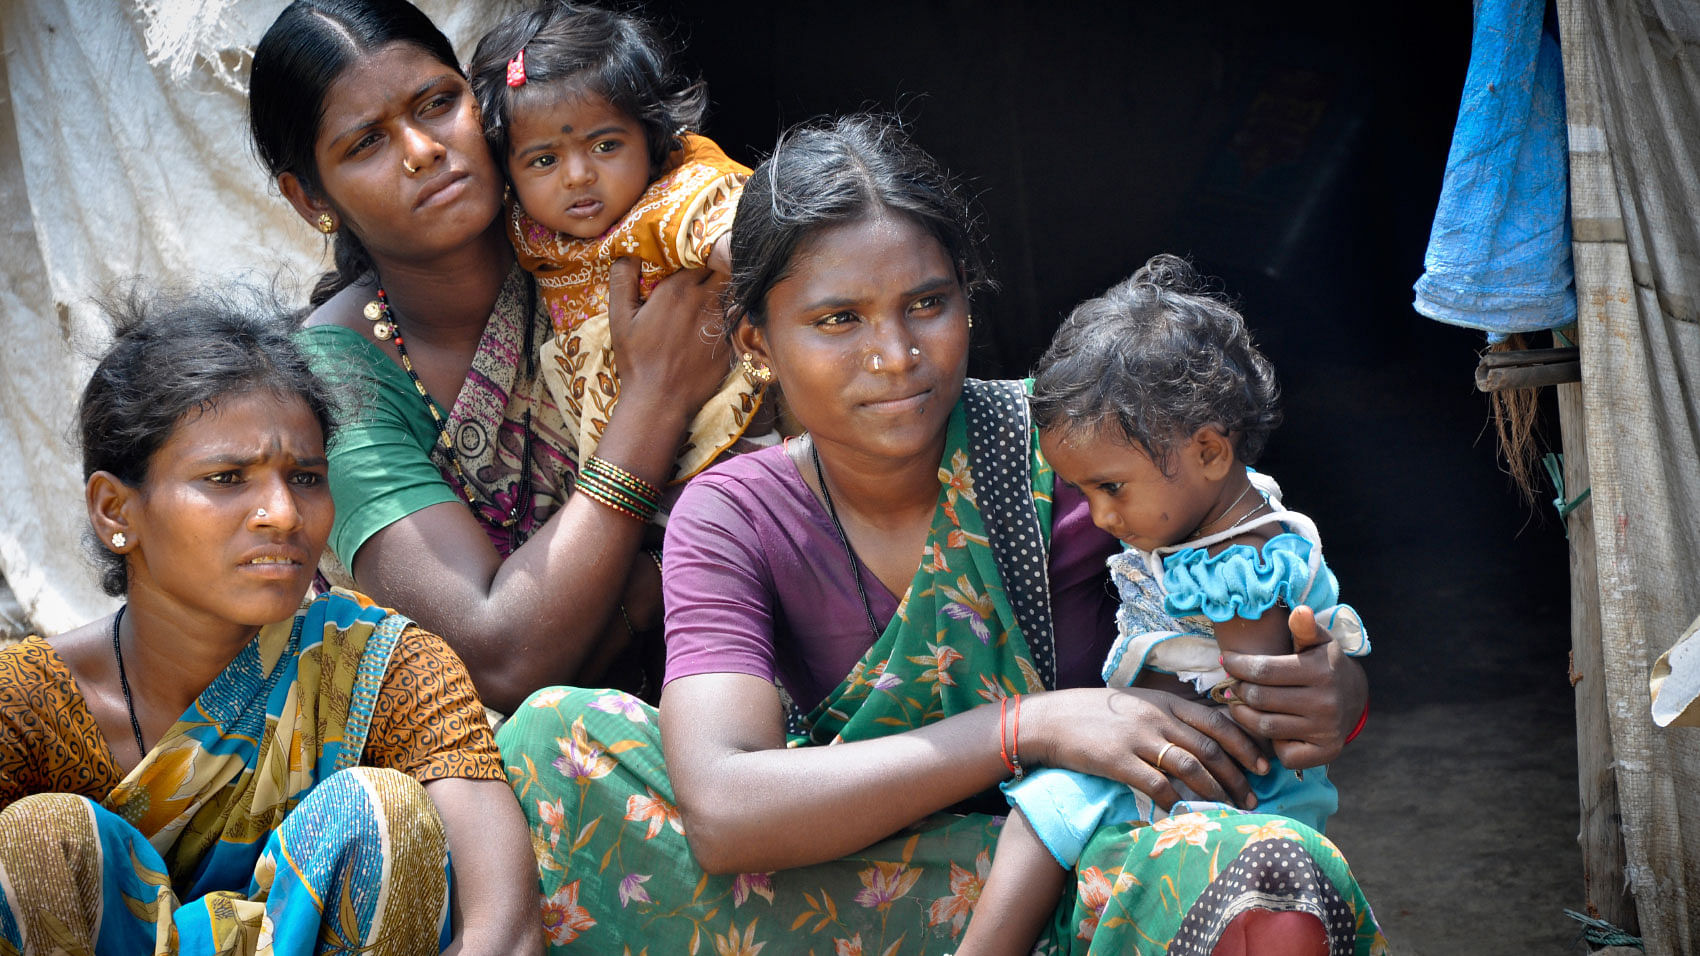 Bihar, India’s fifth <a href="https://www.rbi.org.in/scripts/PublicationsView.aspx?id=18621">poorest</a> state and third most populous, has India’s highest total fertility rate. (Representational Image)